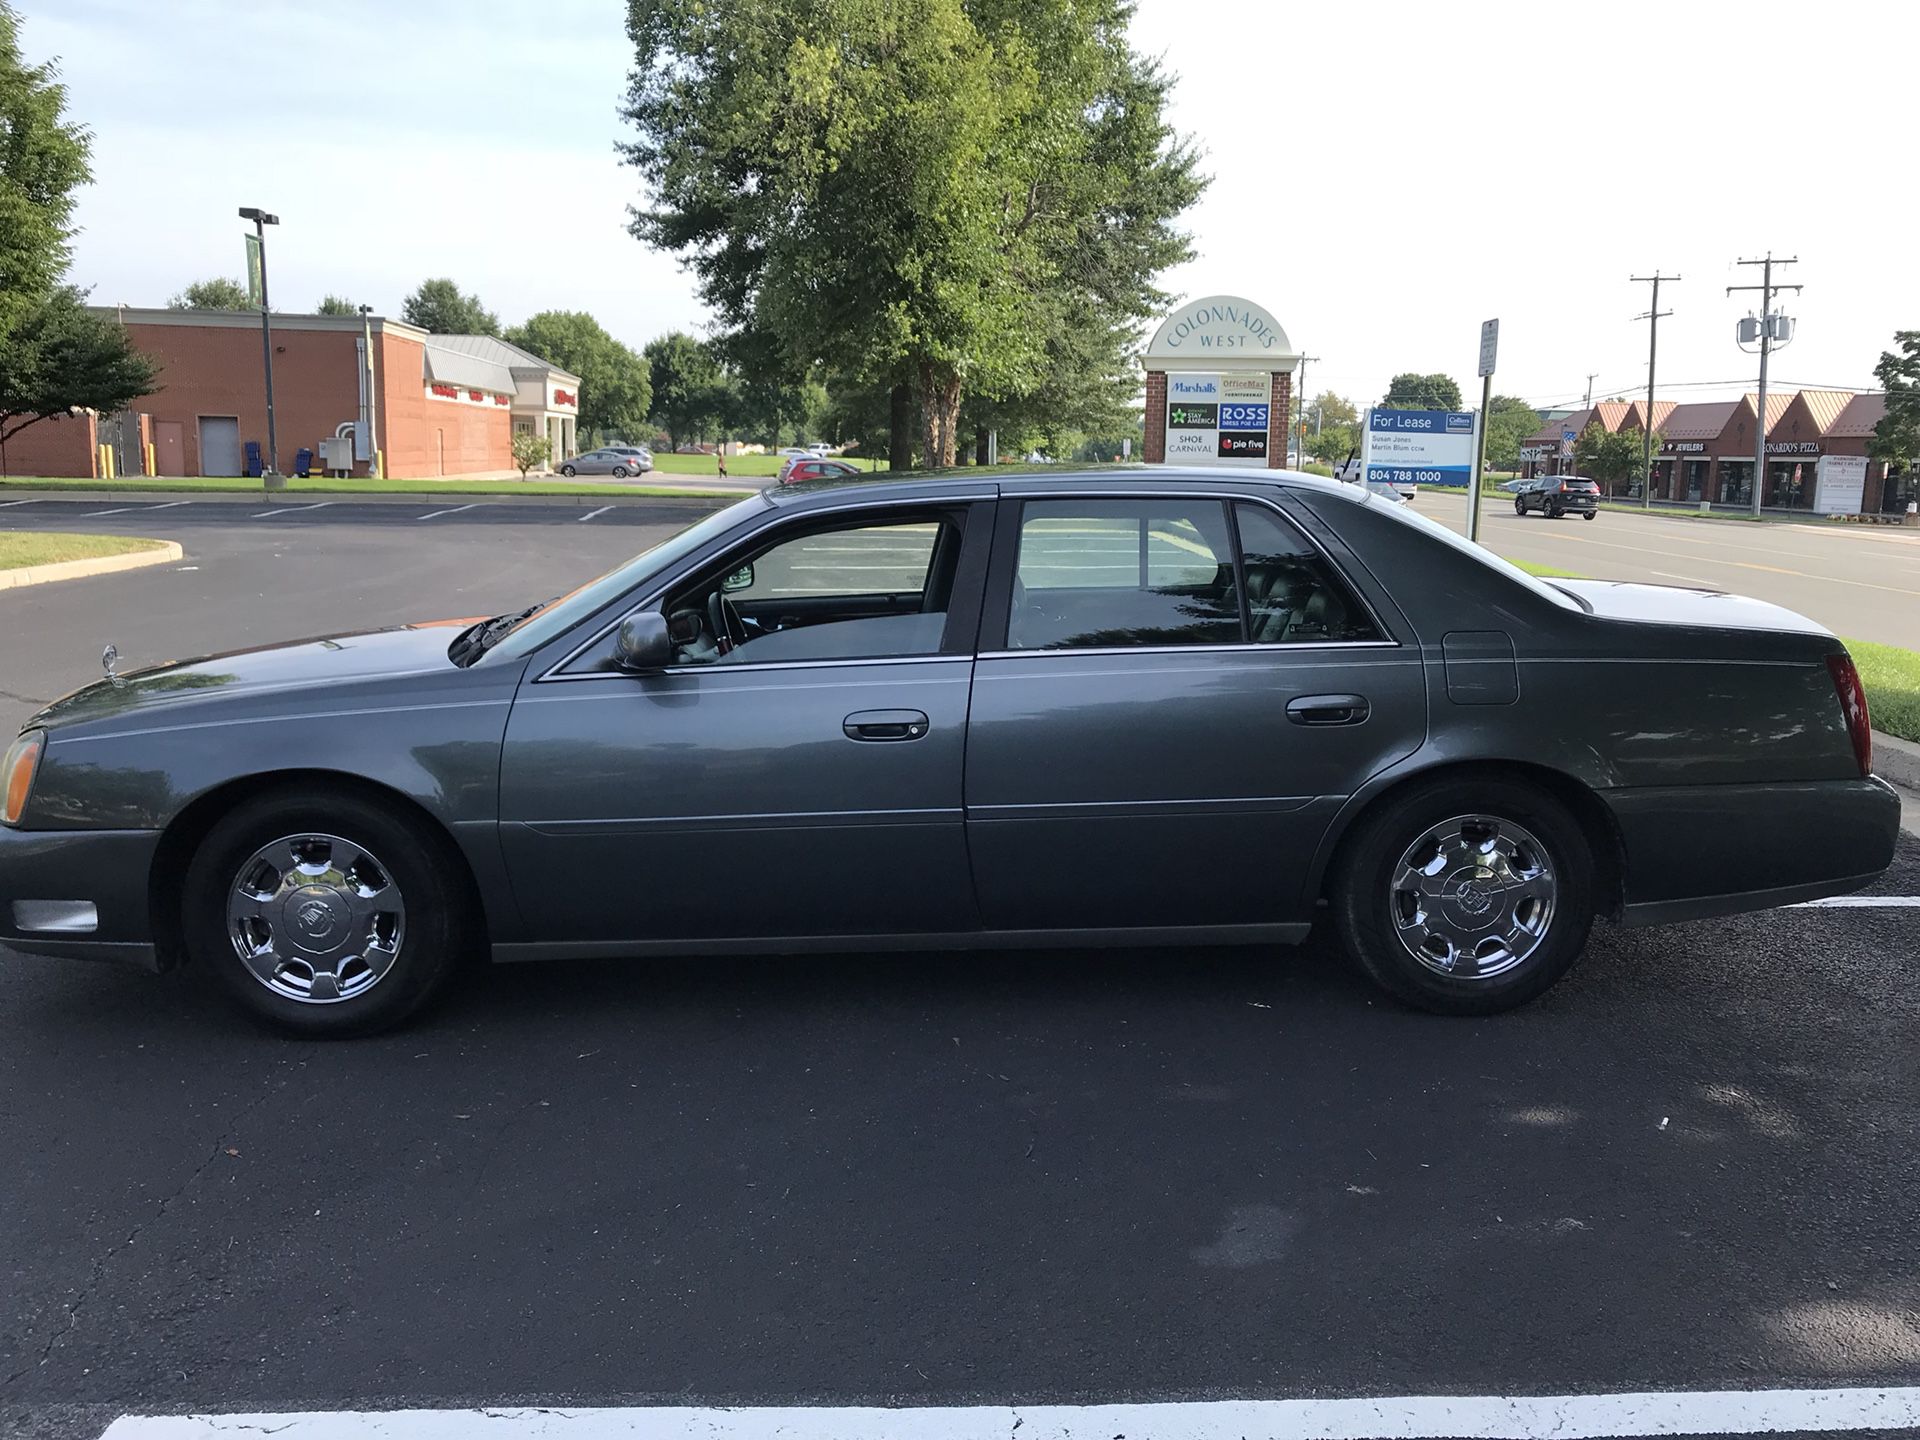 04. Cadillac Deville 130k cold a/c no issues